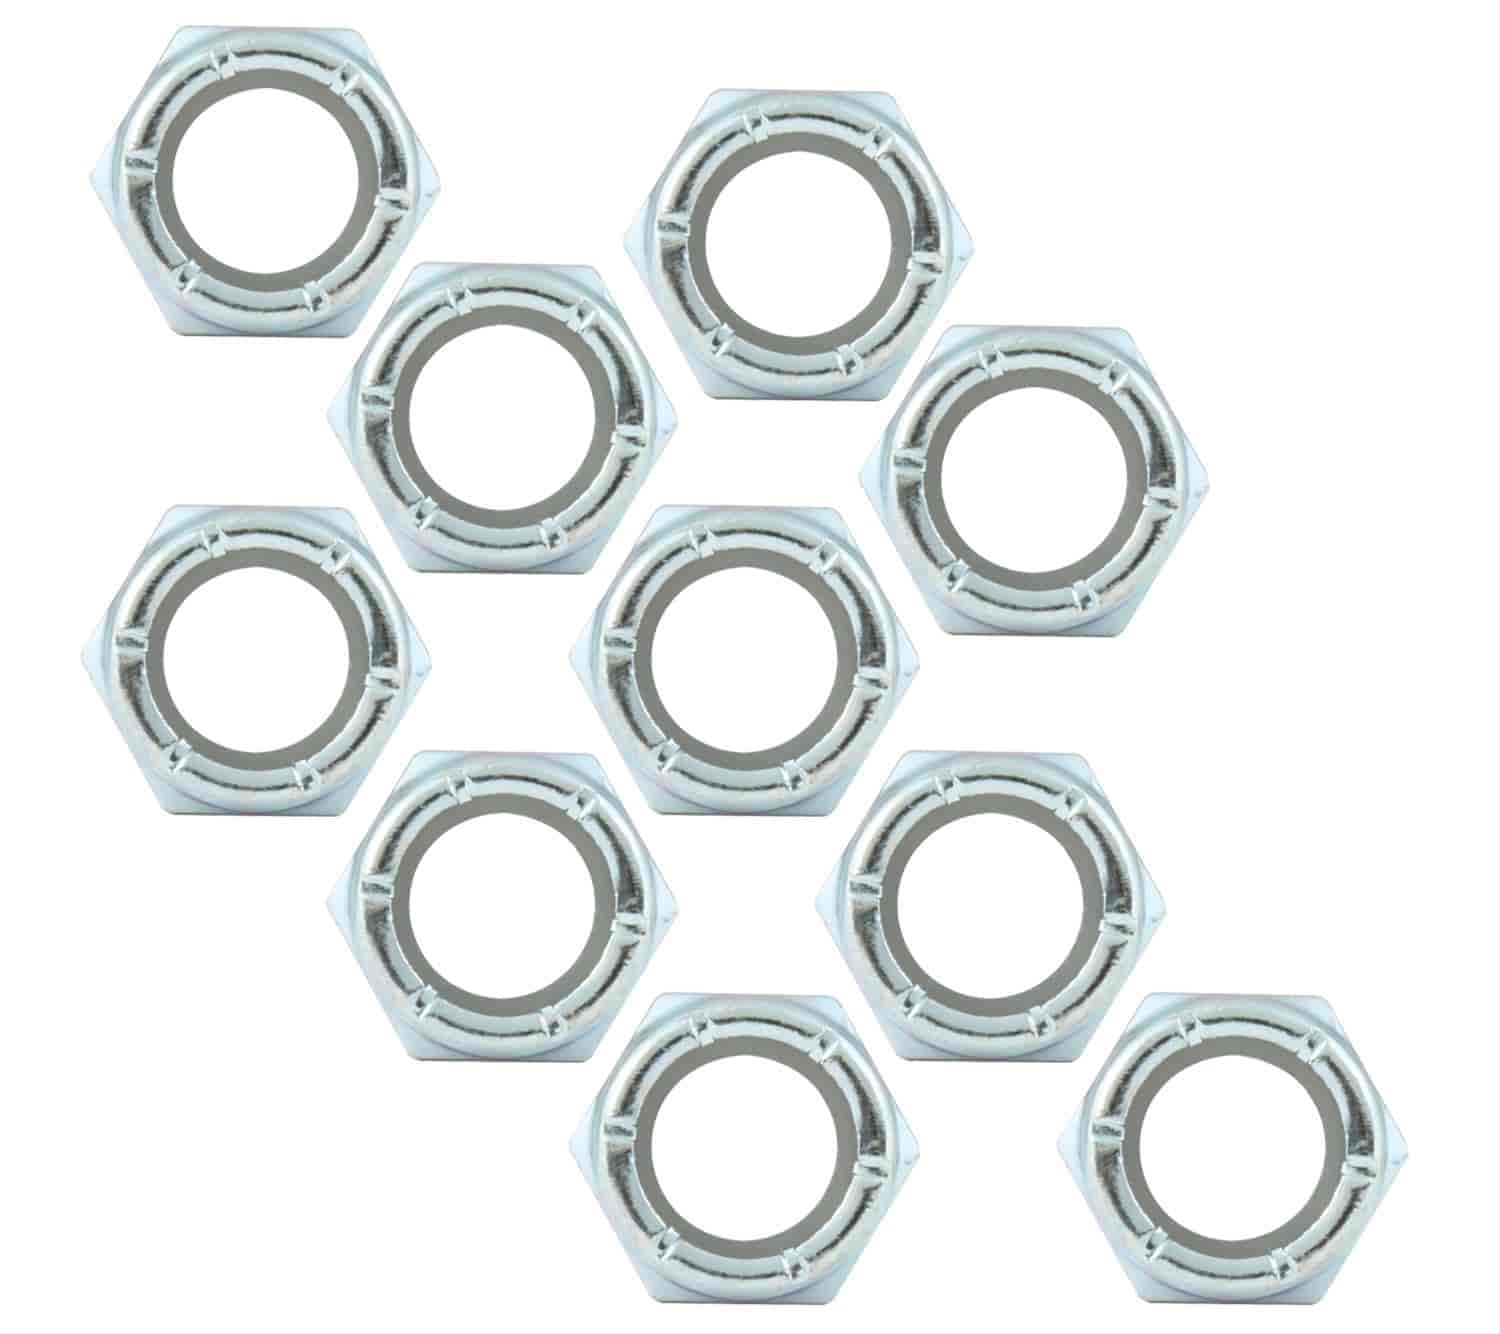 Fine Thread Hex Nuts With Nylon Inserts 1/2"-20